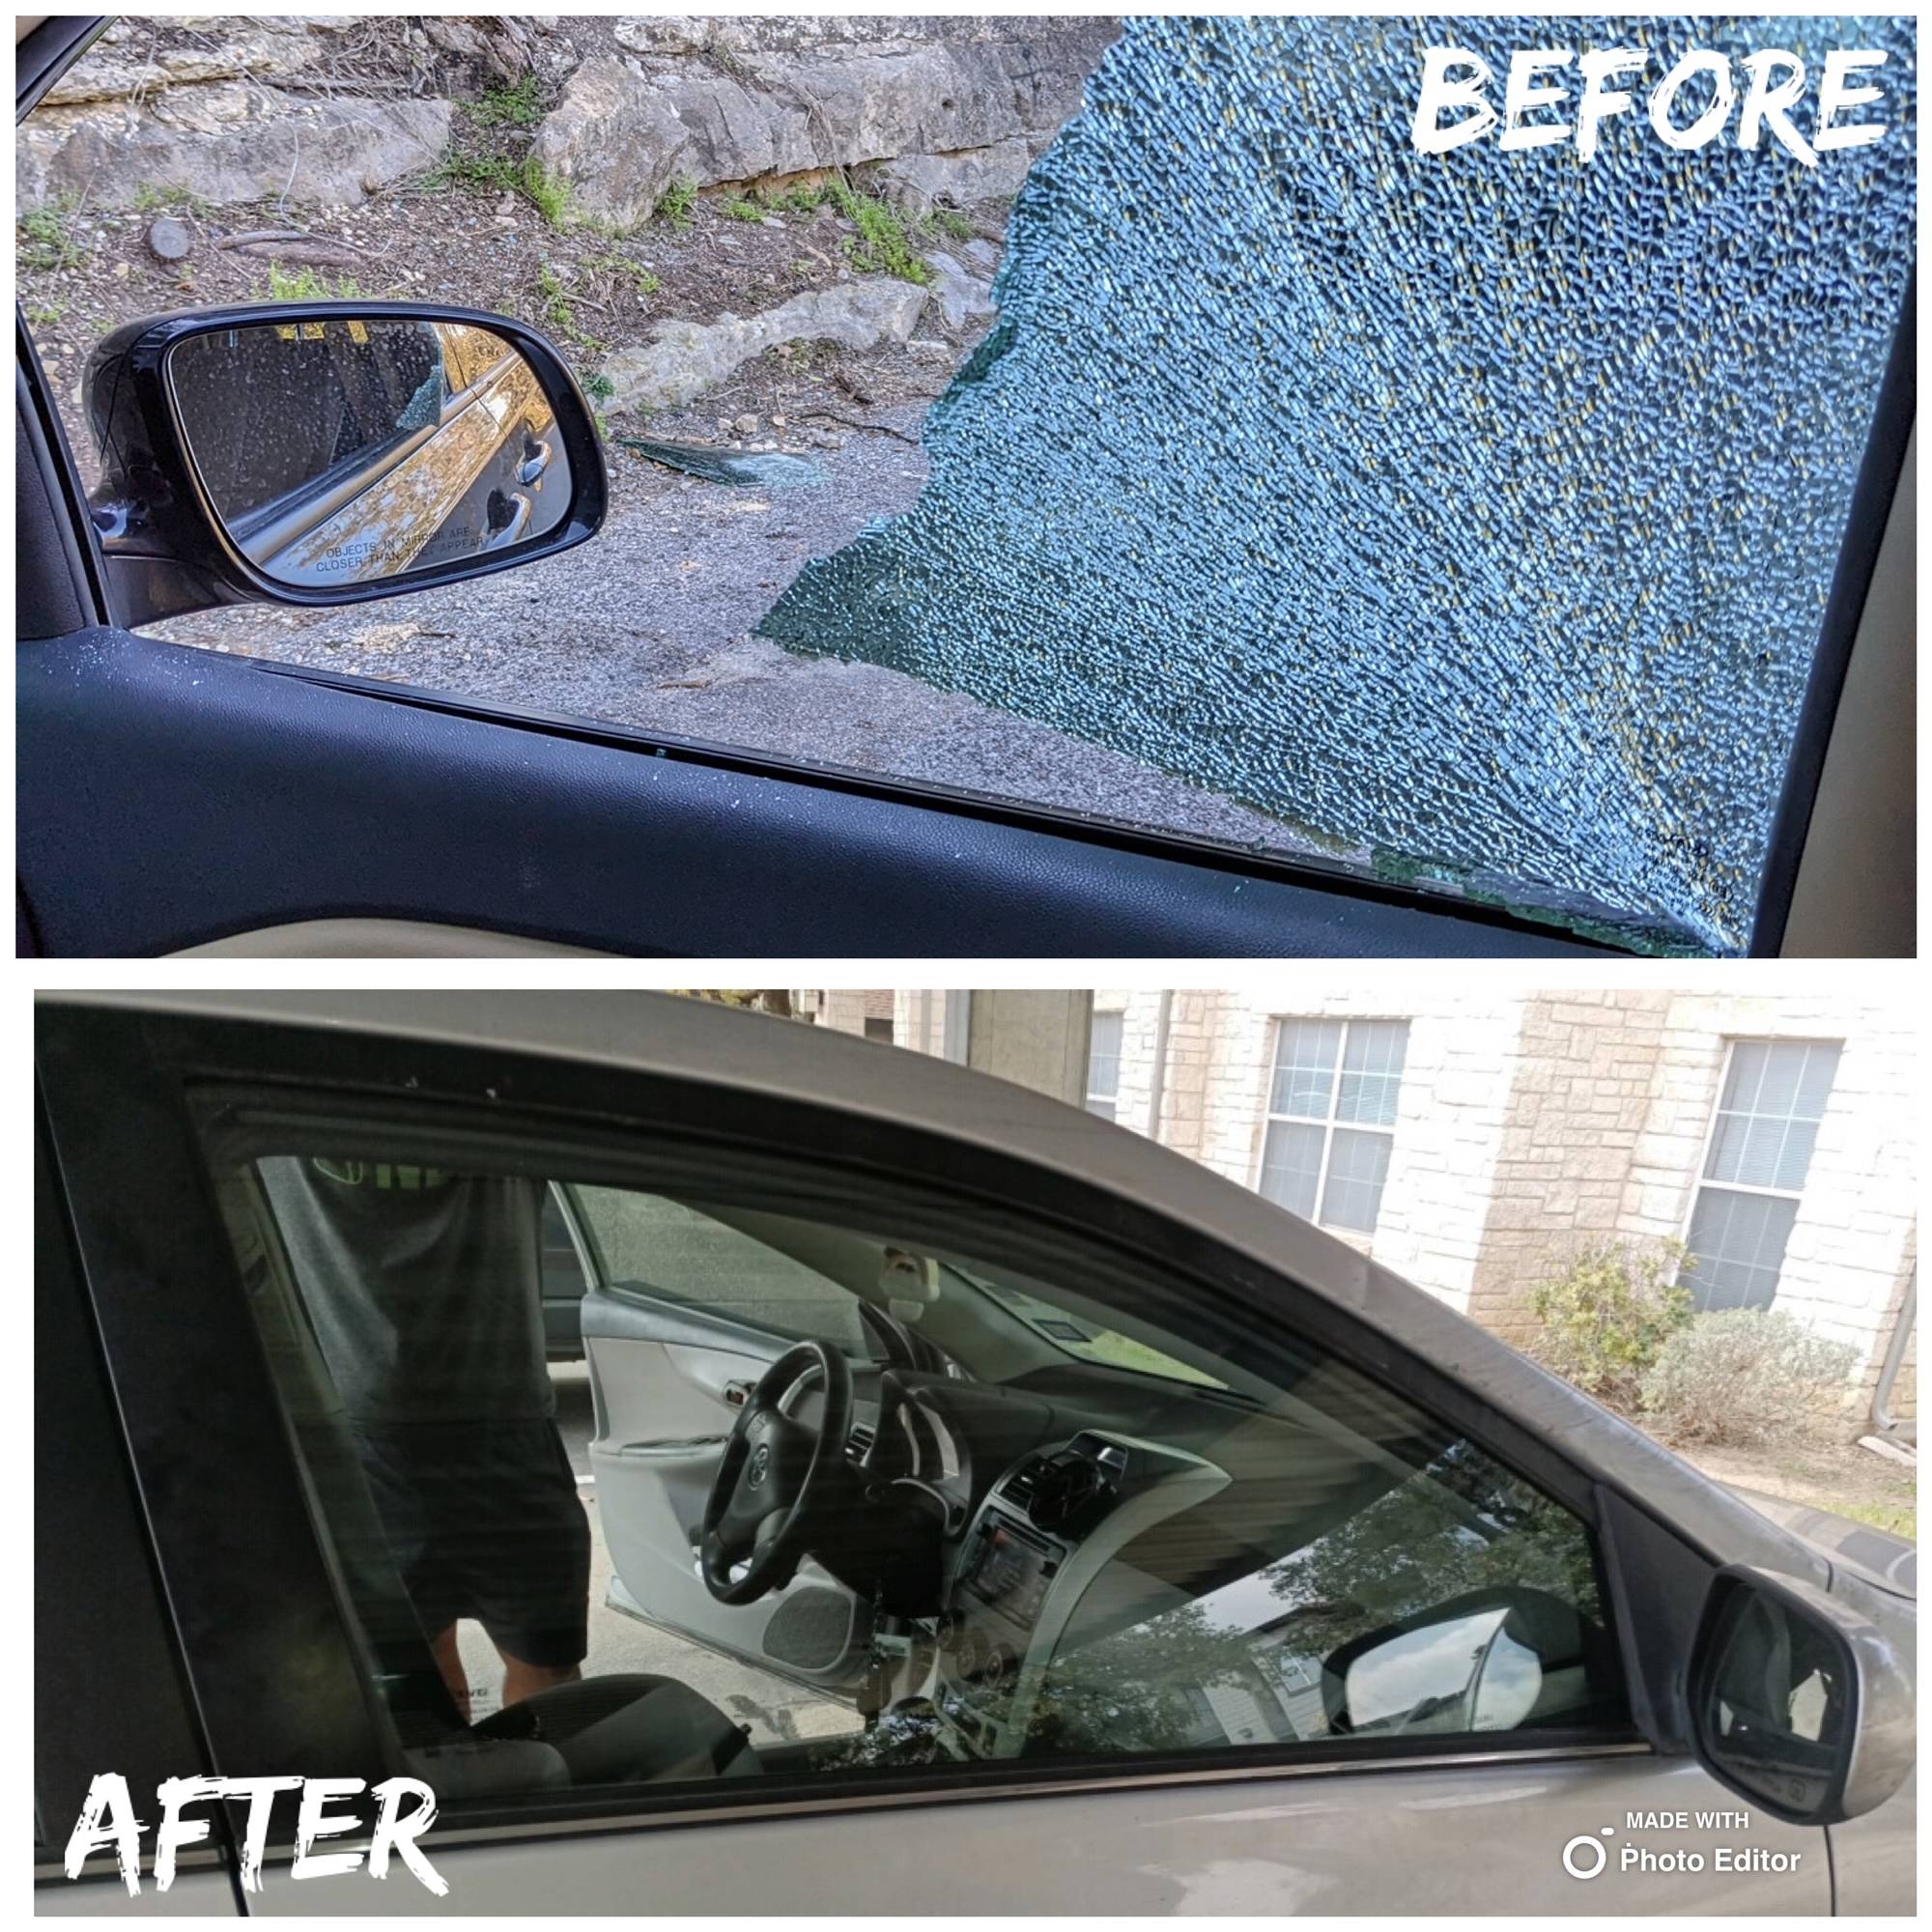 A split image displaying a before-and-after comparison of a sedan's passenger side right front tempered door glass in Helotes, Texas. The top half shows the complete shattering of the glass due to an attempted burglary. The bottom half presents the repaired state of the door glass after a home auto glass appointment.